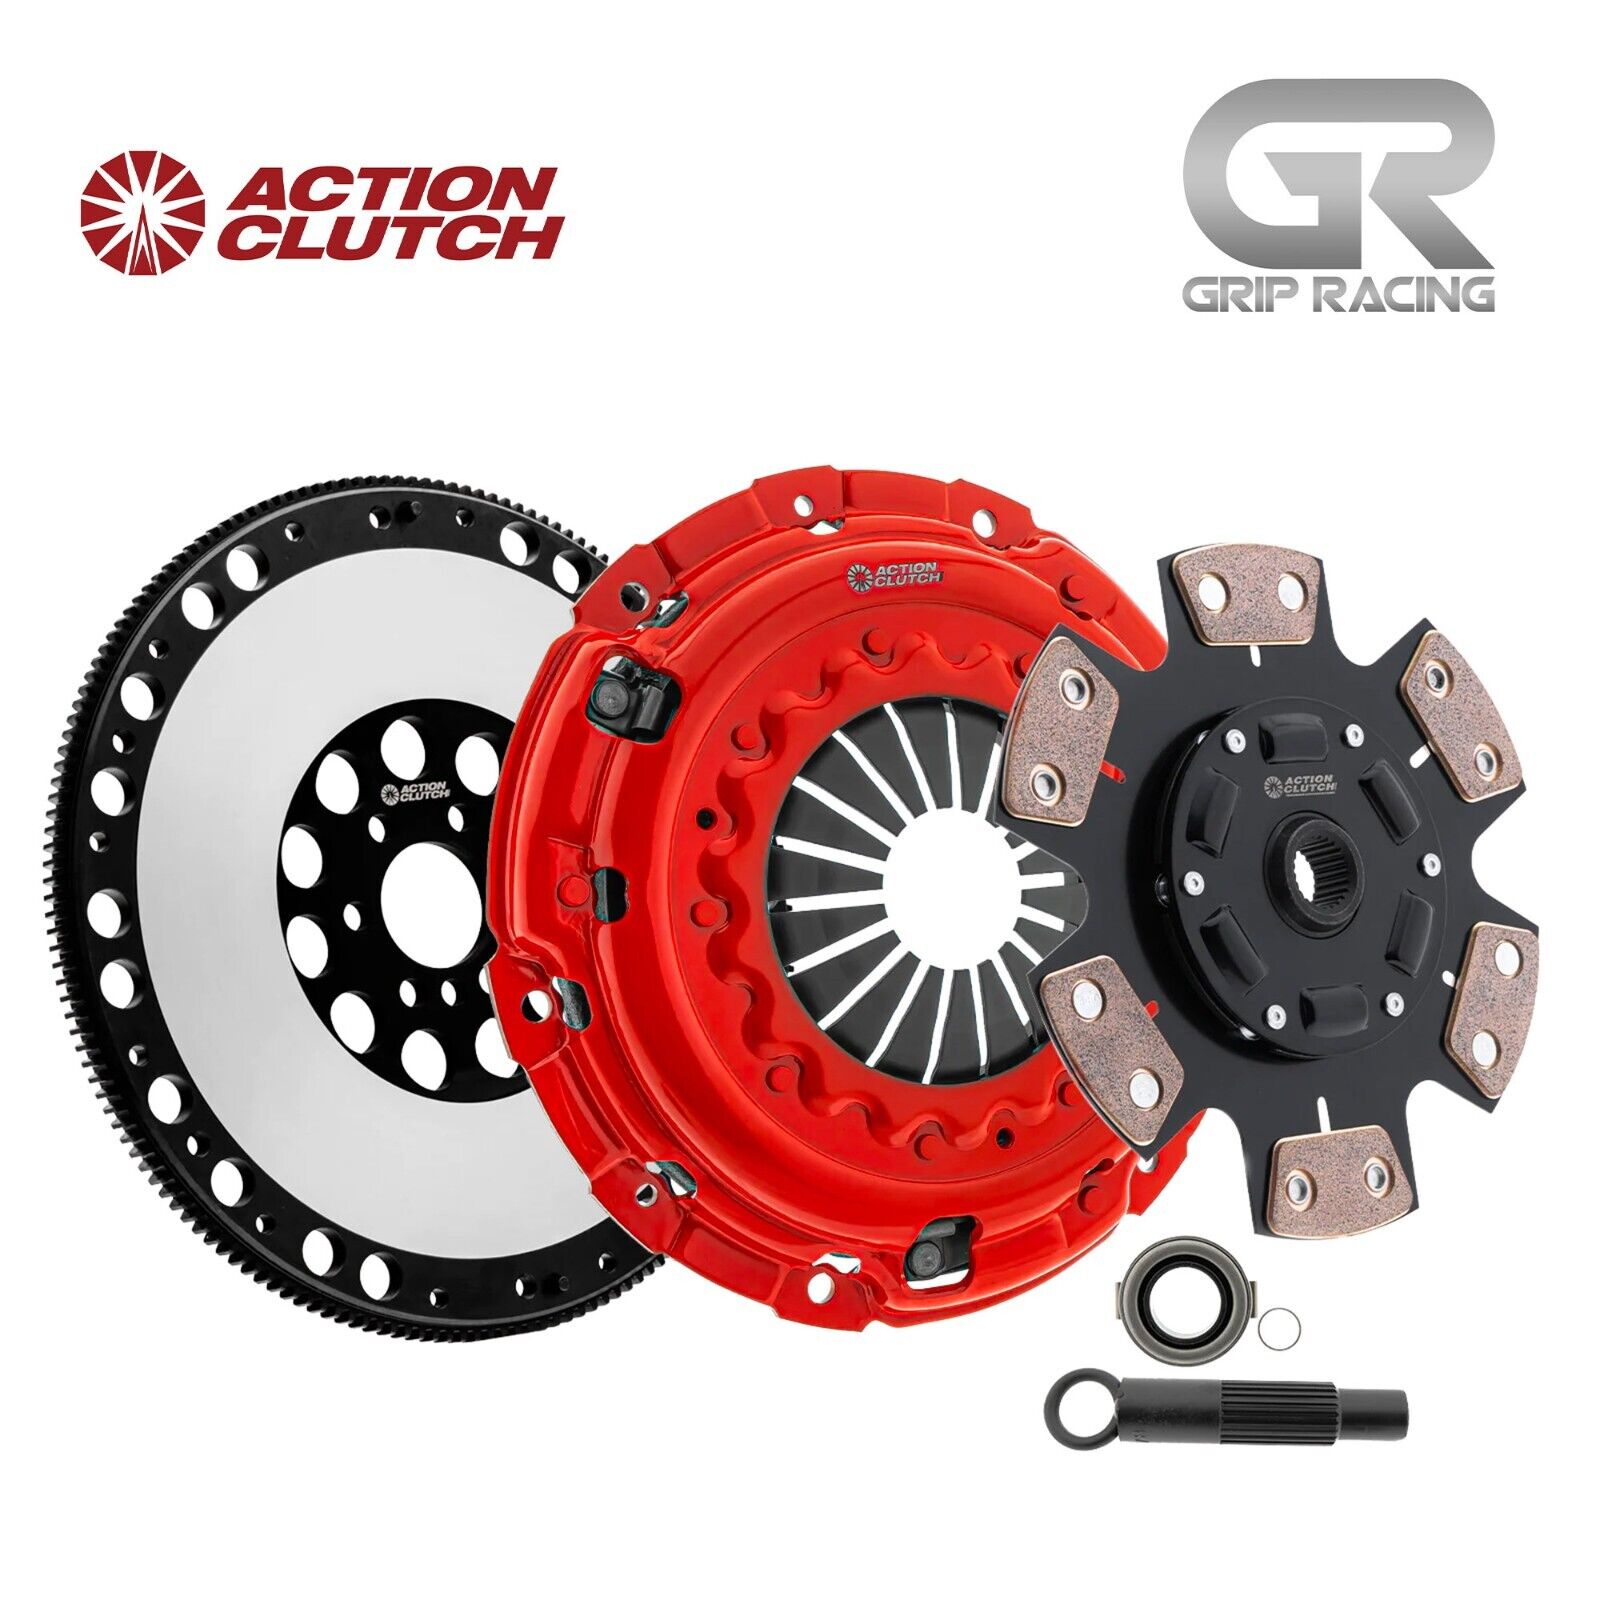 AC Stage 3 Clutch Kit (1MS) with Flywheel For Honda Accord 2003-12 2.4L (K24A4)